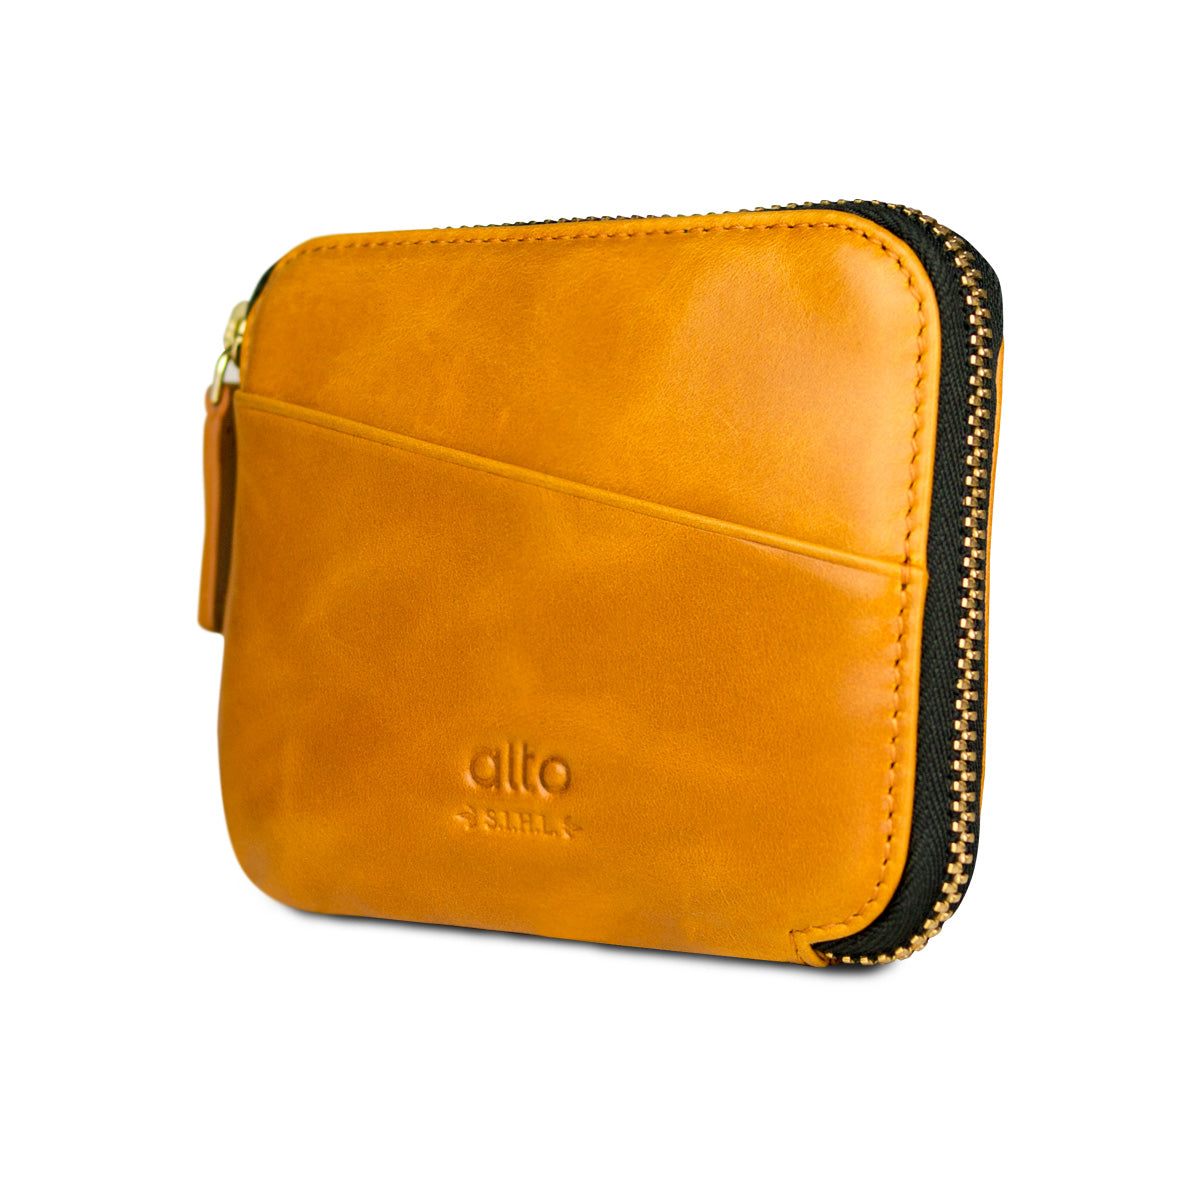 Leather Pouch Wallet – Caramel Brown